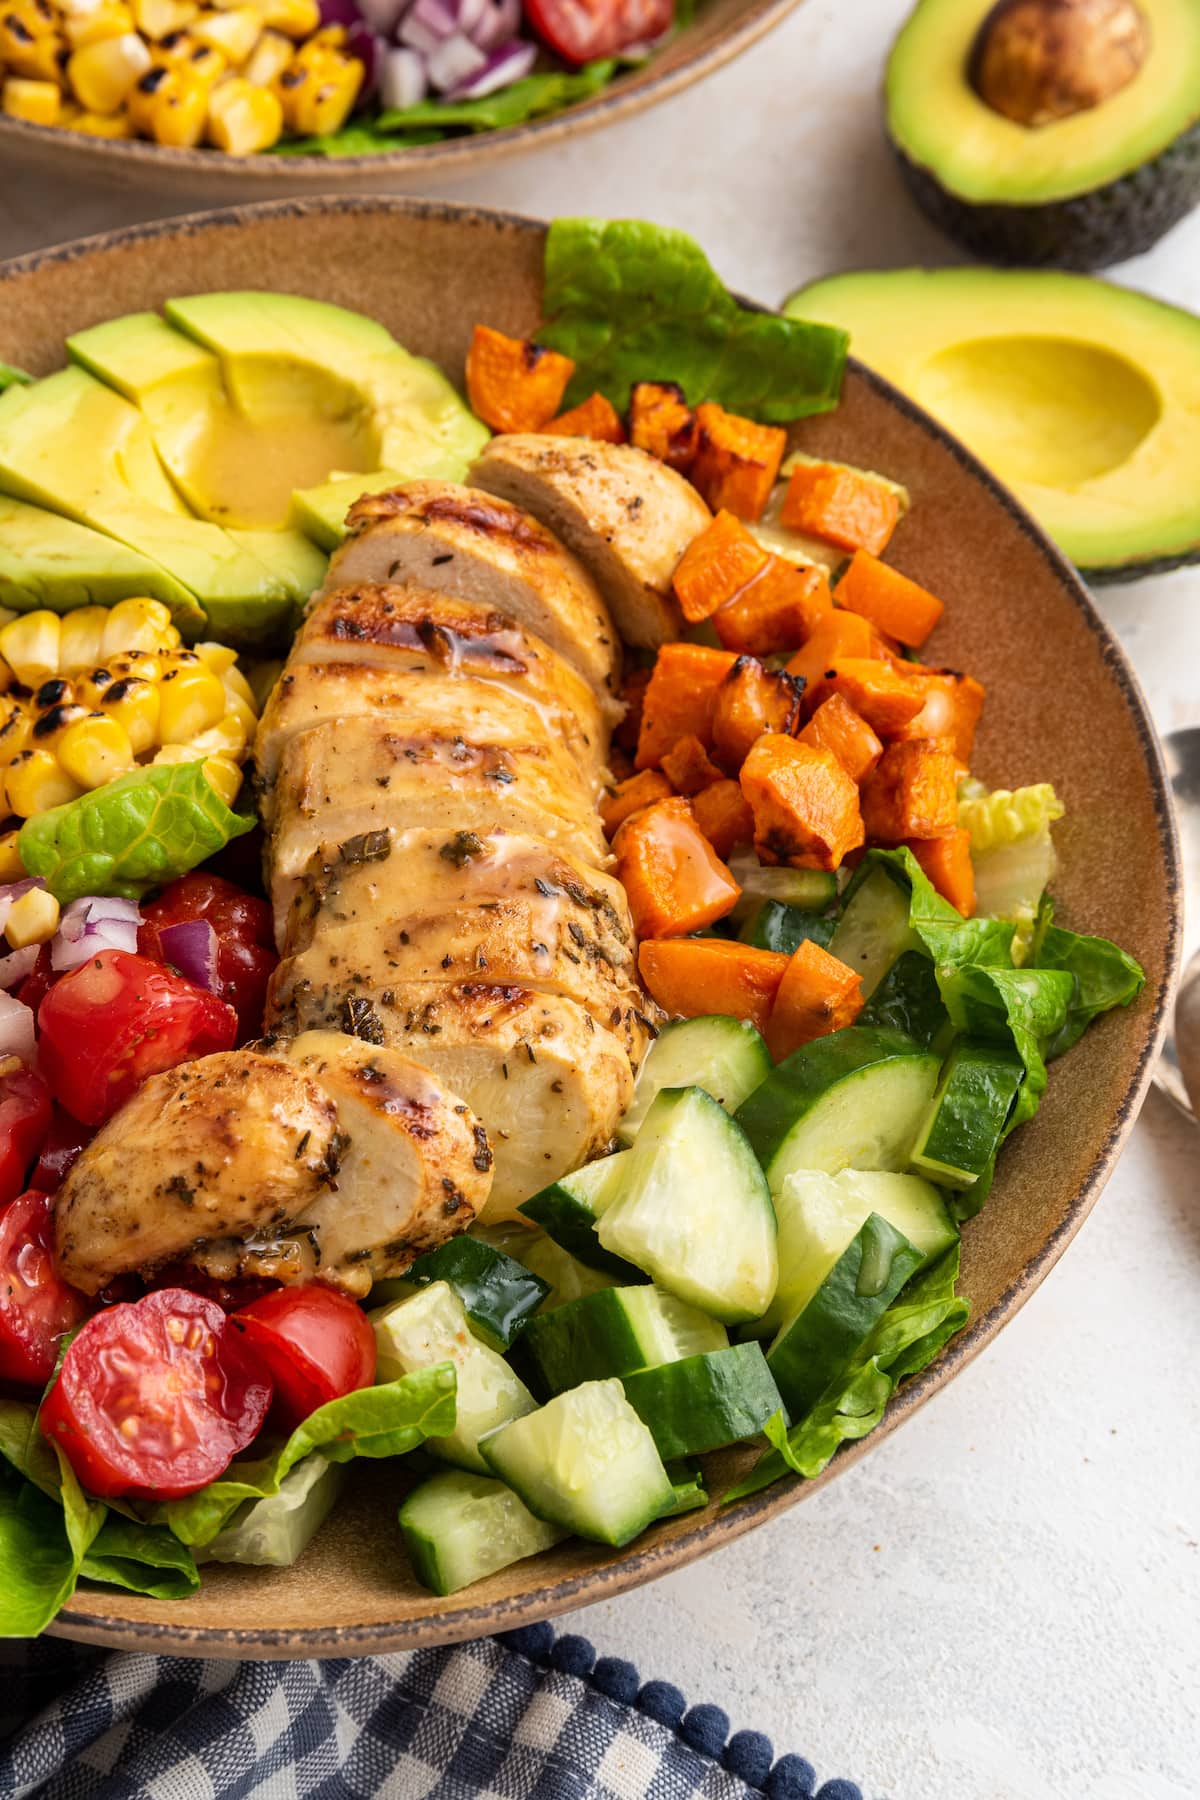 A close-up image of grilled chicken salad in a shallow bowl.